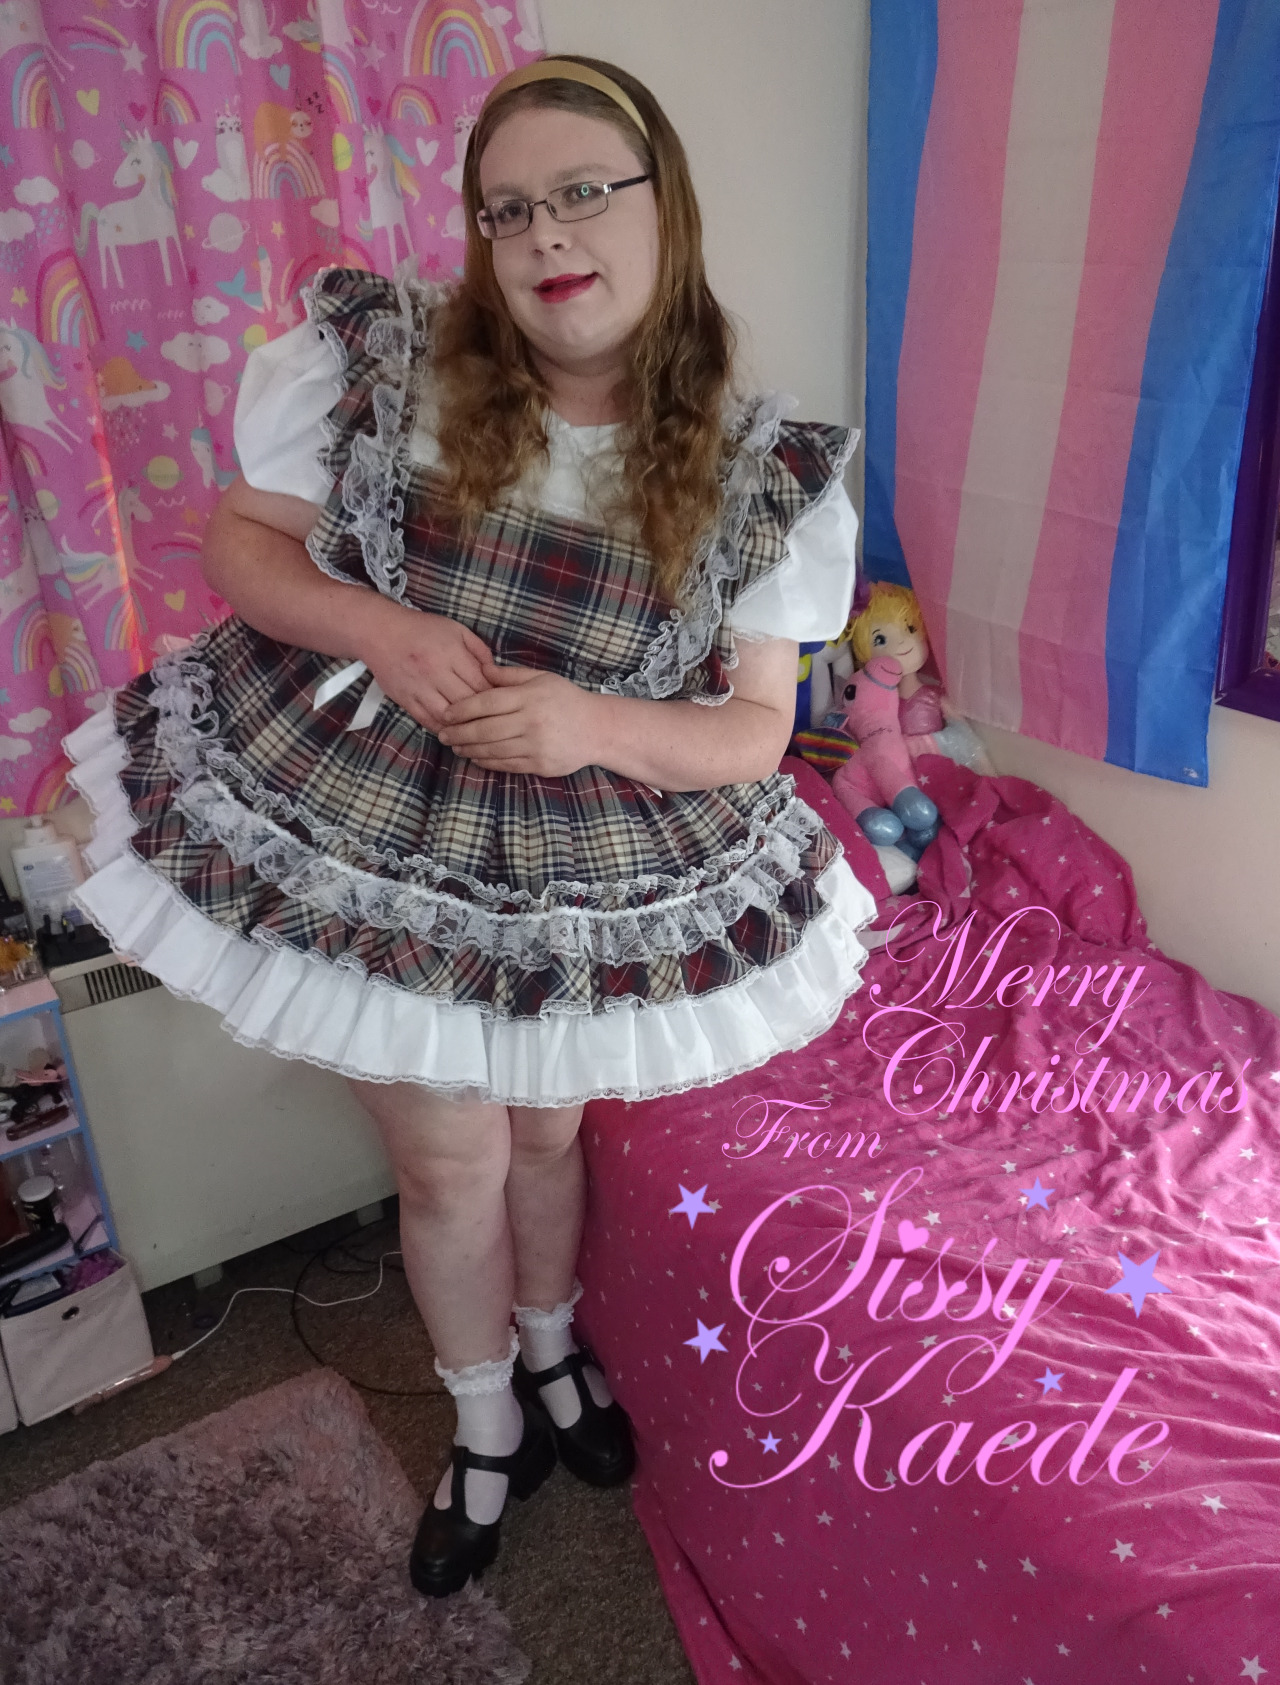 Merry Christmas everyone xxWhile not for me I hope all those who enjoy it did and had a fab day. To all my sissy freinds I hope someing grily and frilly was worn to make the day even better hehe xx #sissy#sissydress#frillysissy#sissygirl#sissyschoolgirl#prissysissy